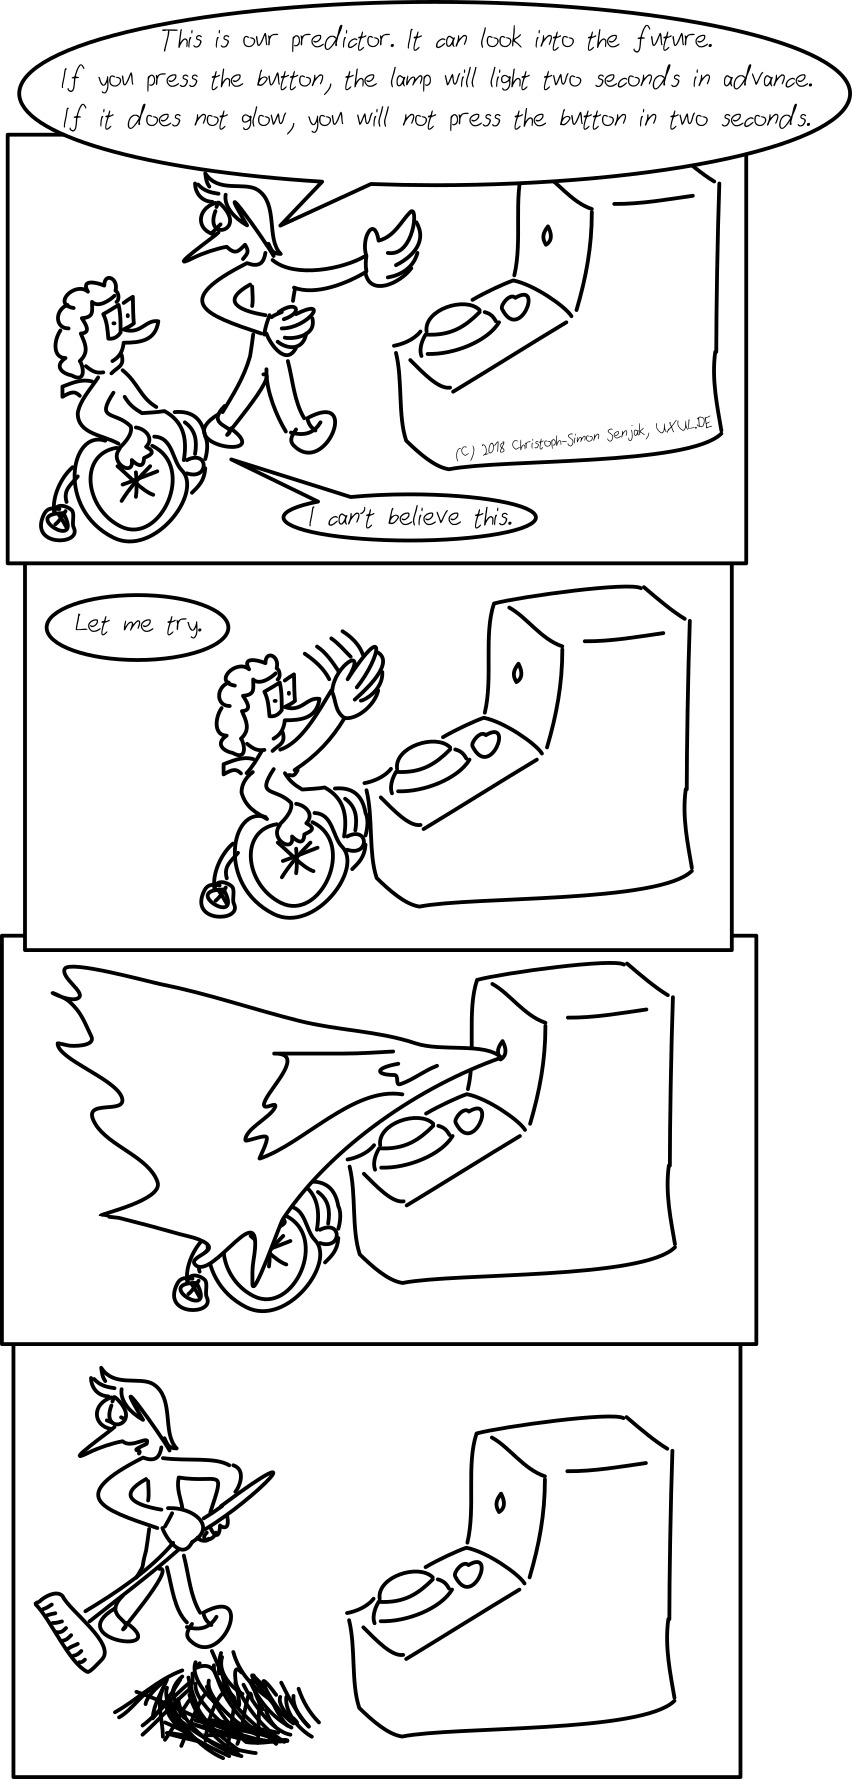 Panel 1: A (wheelchair driving) guest is shown, a guide, and a machine (the predictor). The guide says "This is our predictor. It can look into the future. If you press the button, the lamp will light two seconds in advance. If it does not glow, you will not press the button in two seconds." The guest says: "I can't believe this." -- Panel 2: The guest says "Let me try" and starts to reach with his hand for the button on the predictor. -- Panel 3: The predictor machine spits out fire on the guest. -- Panel 4: Only ashes are left of the guest. The guide has a broom and sweeps the ashes.